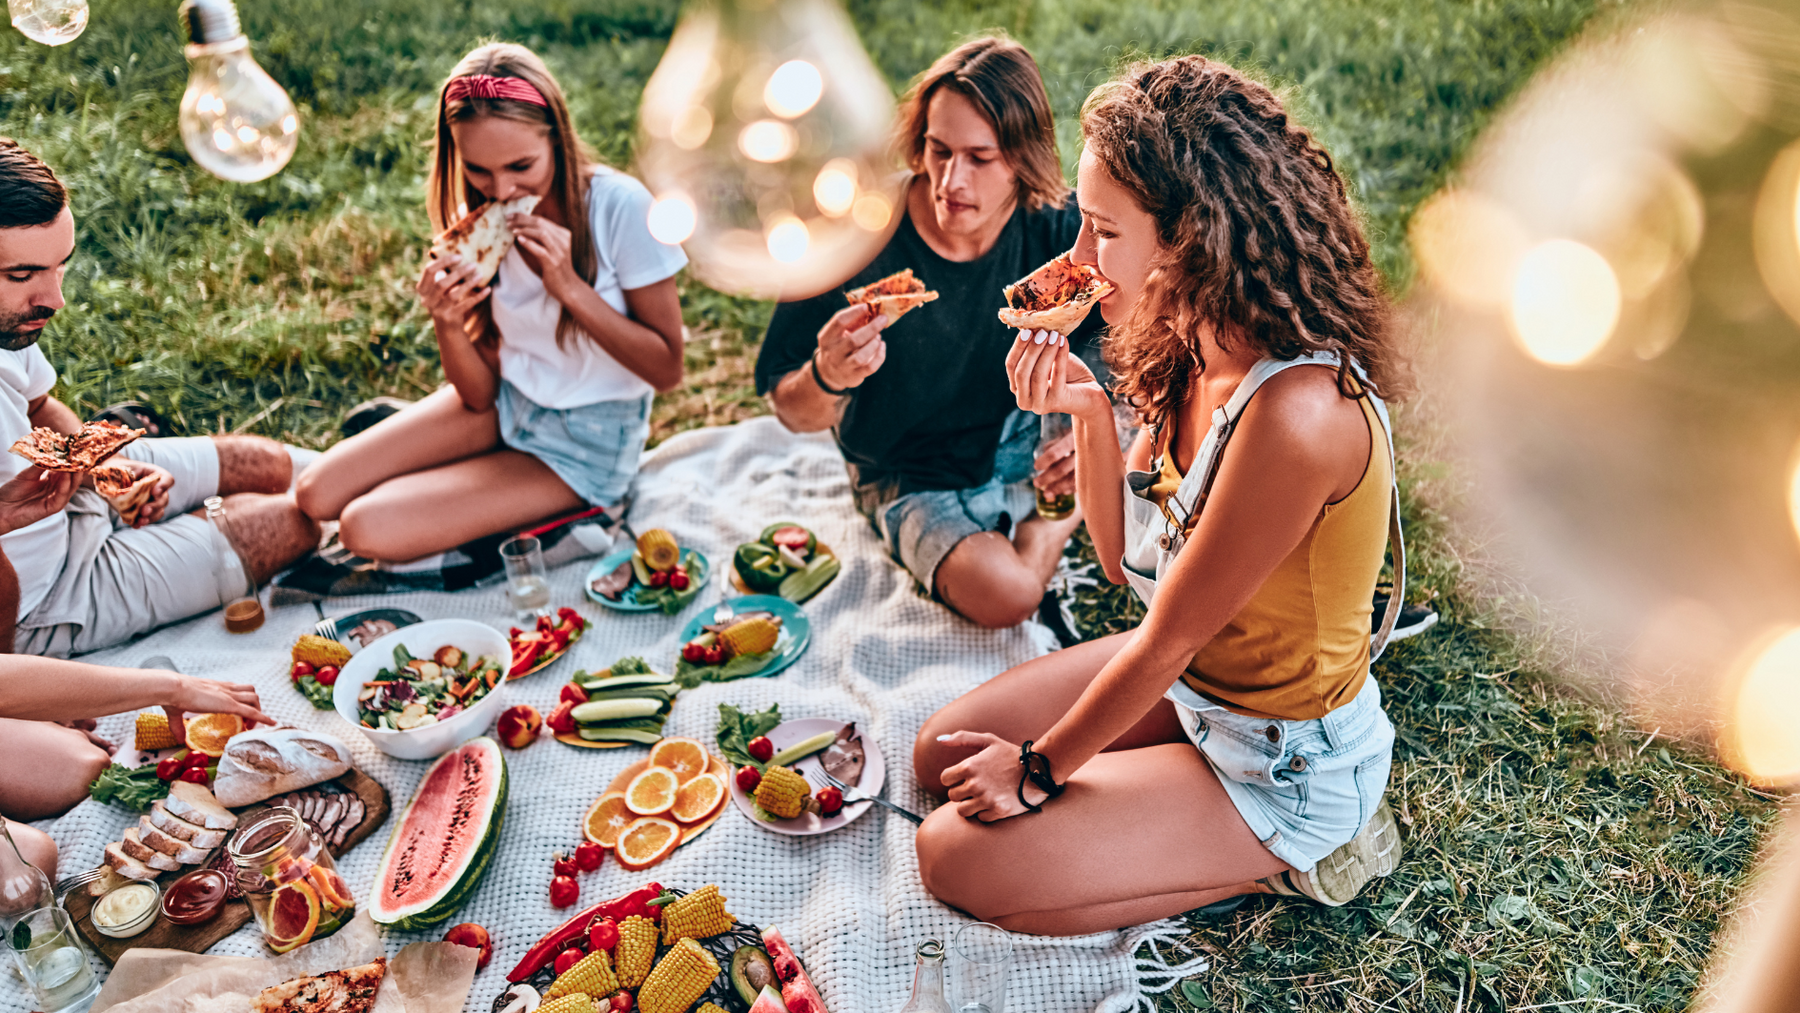 Summer Picnic Ideas and Food Options